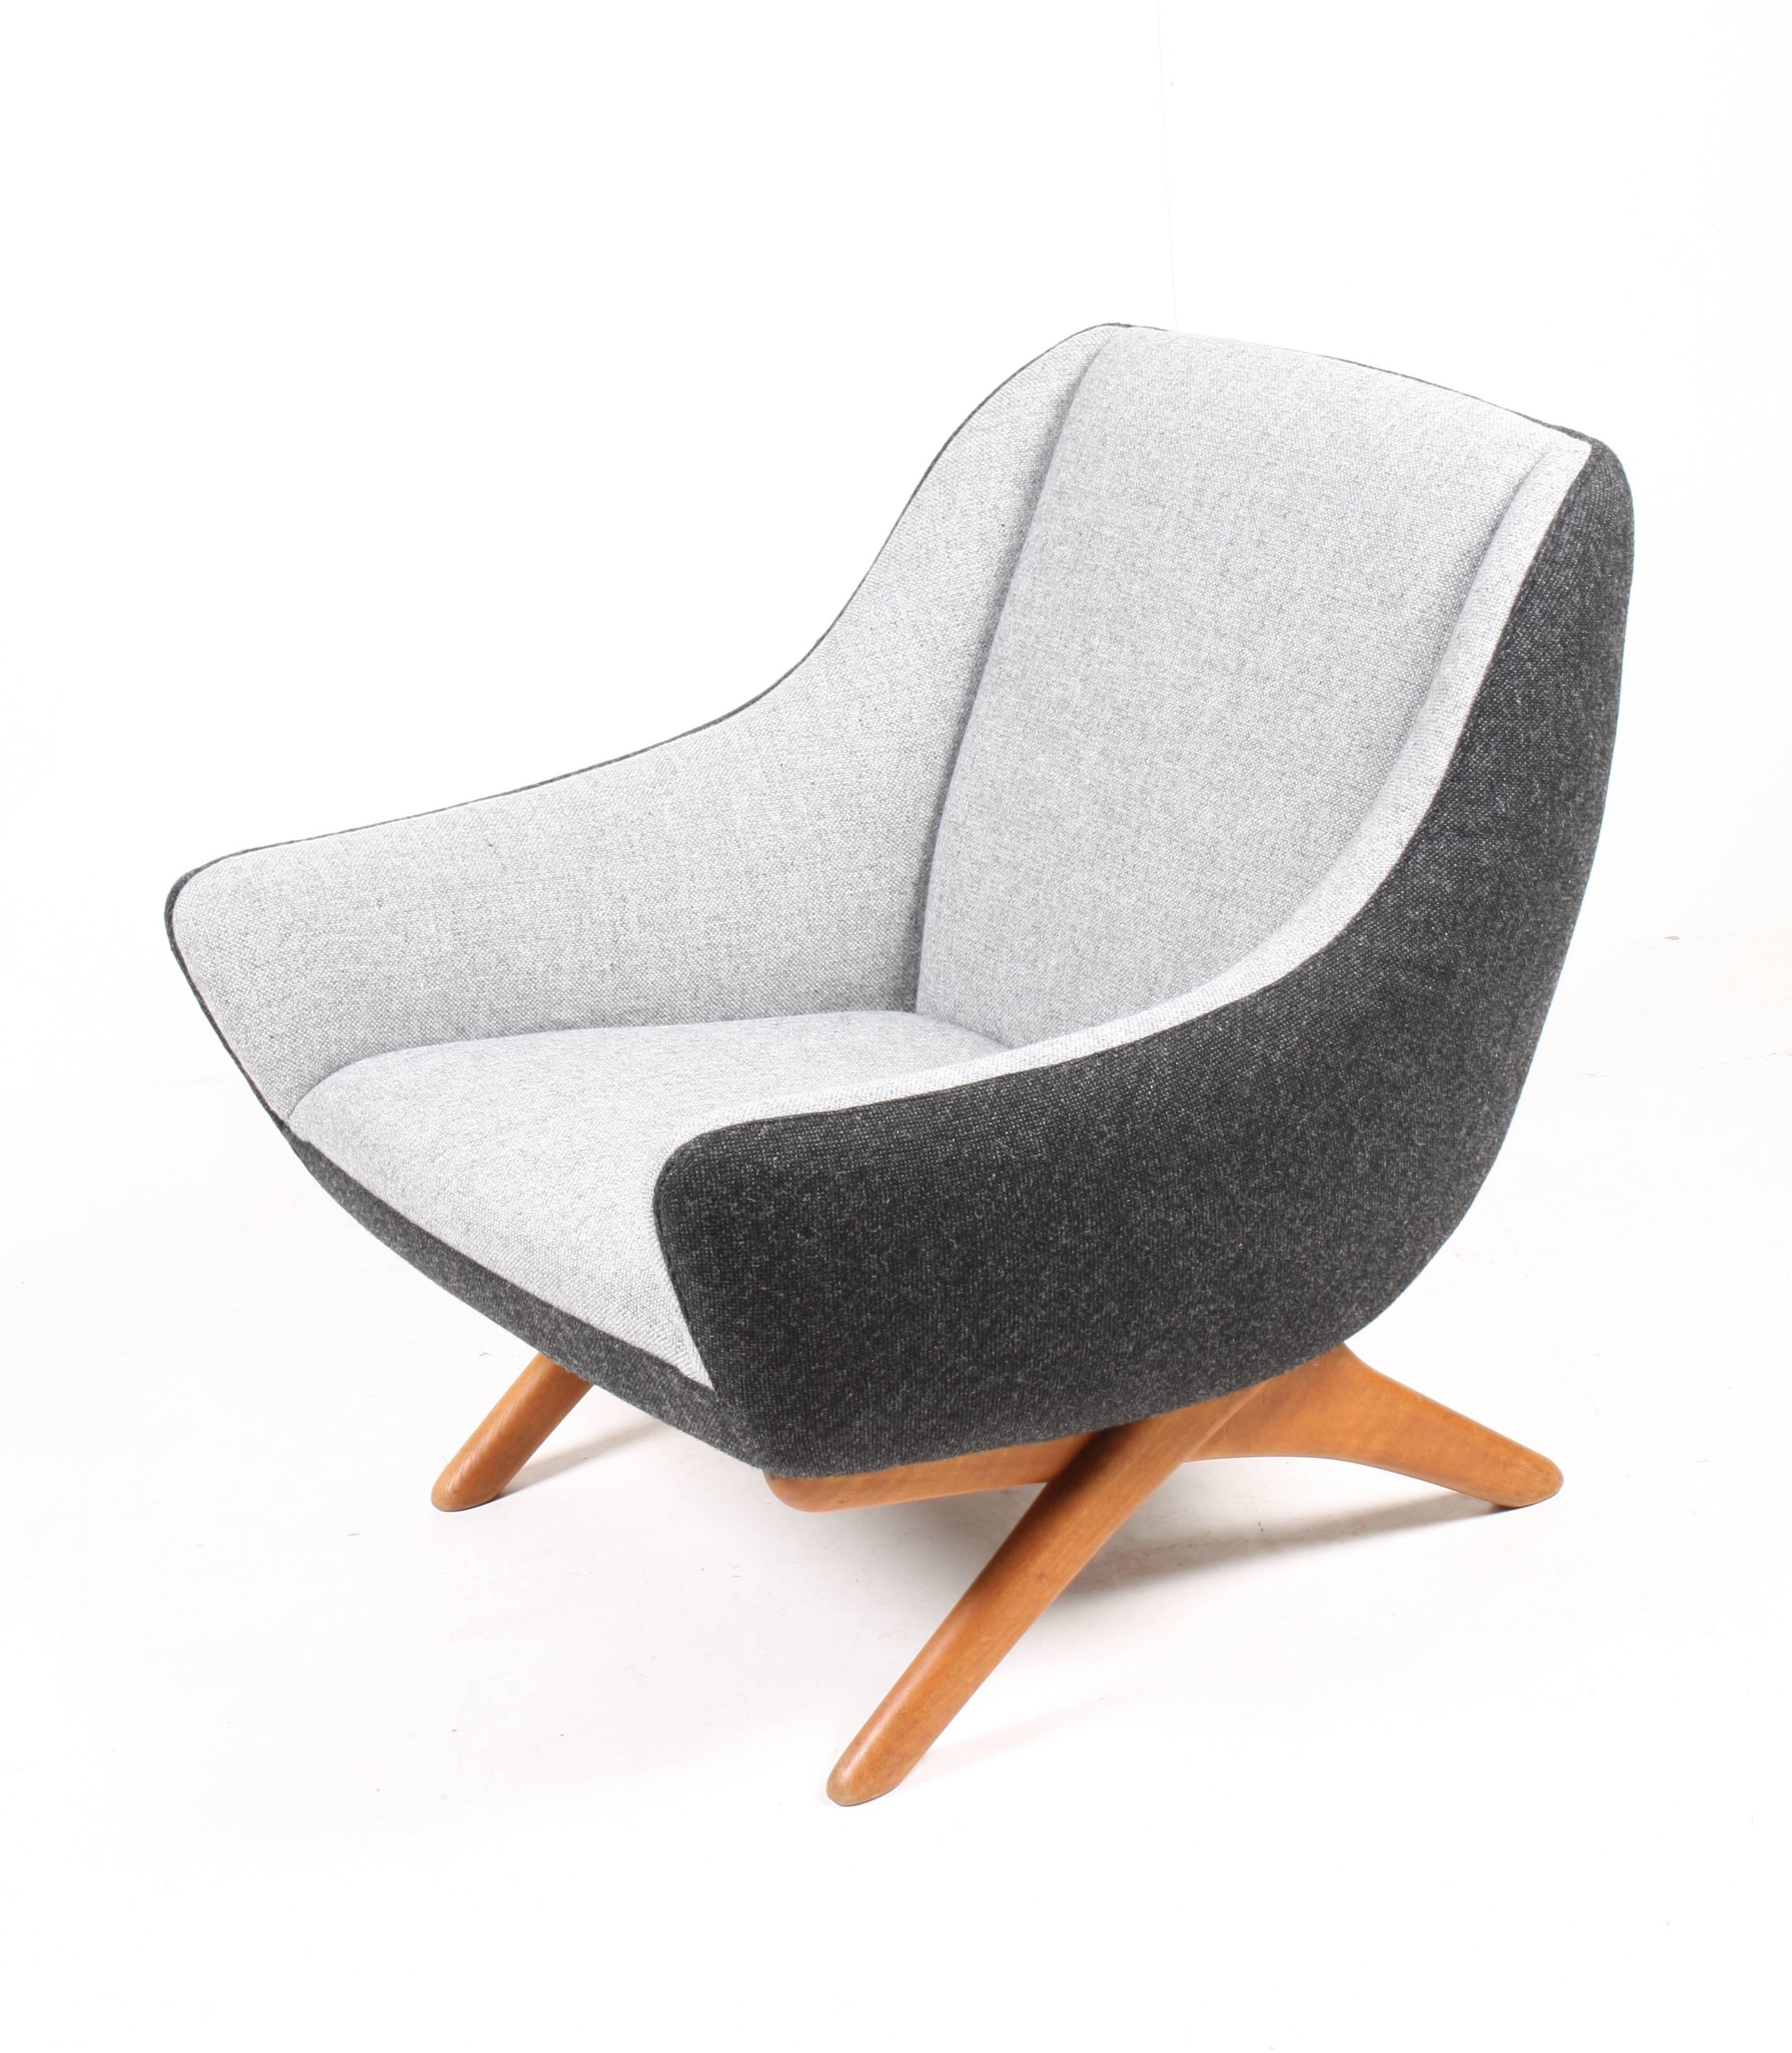 Danish Midcentury Lounge Chair and Ottoman with New Kvadrat Fabric by Illum Willelsoe